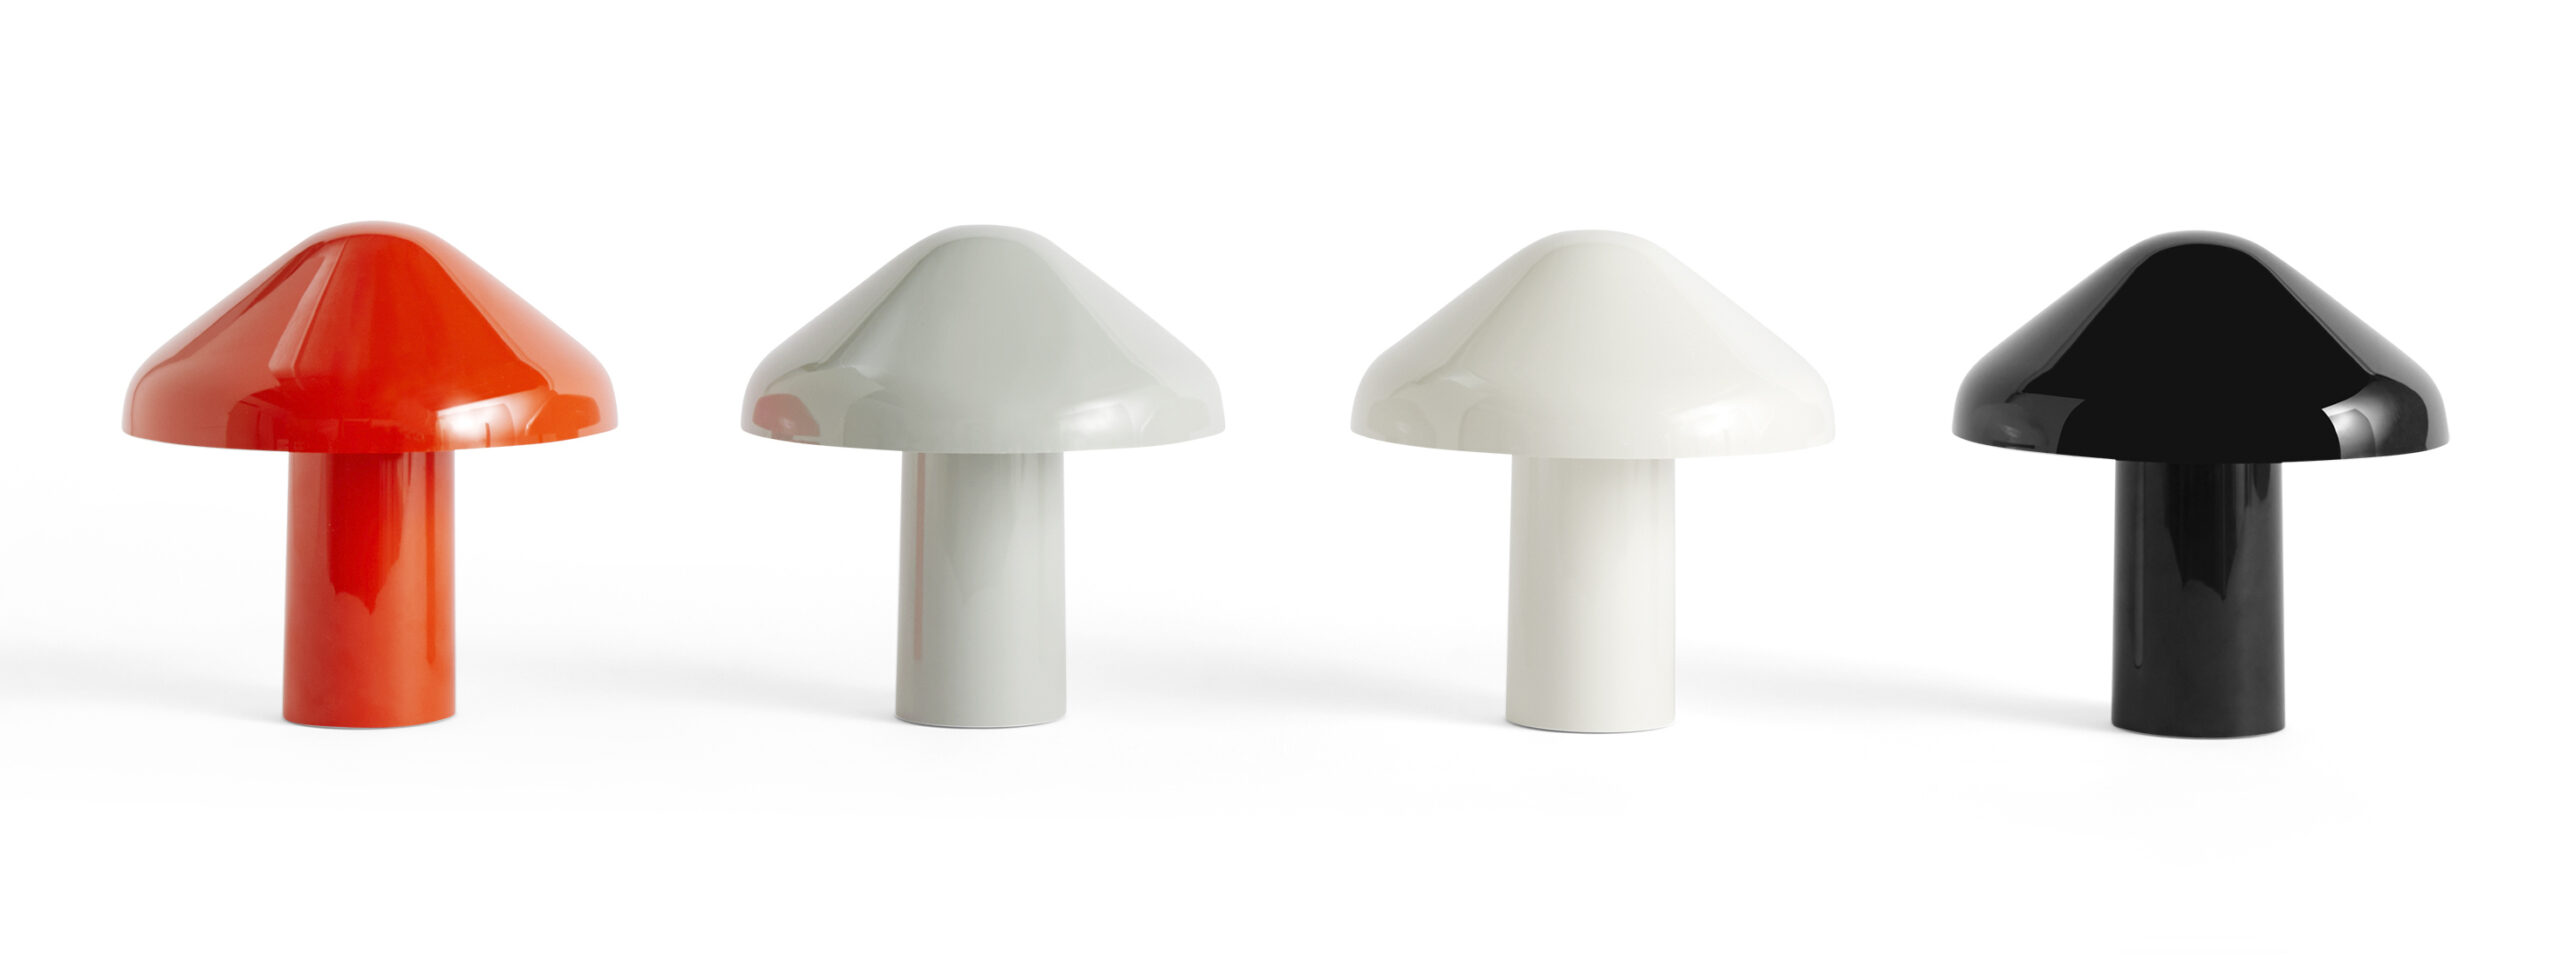 Mushroom lamps like the Pau light by Naoto Fukasawa for Hay is one of 2022's summer interior design trends